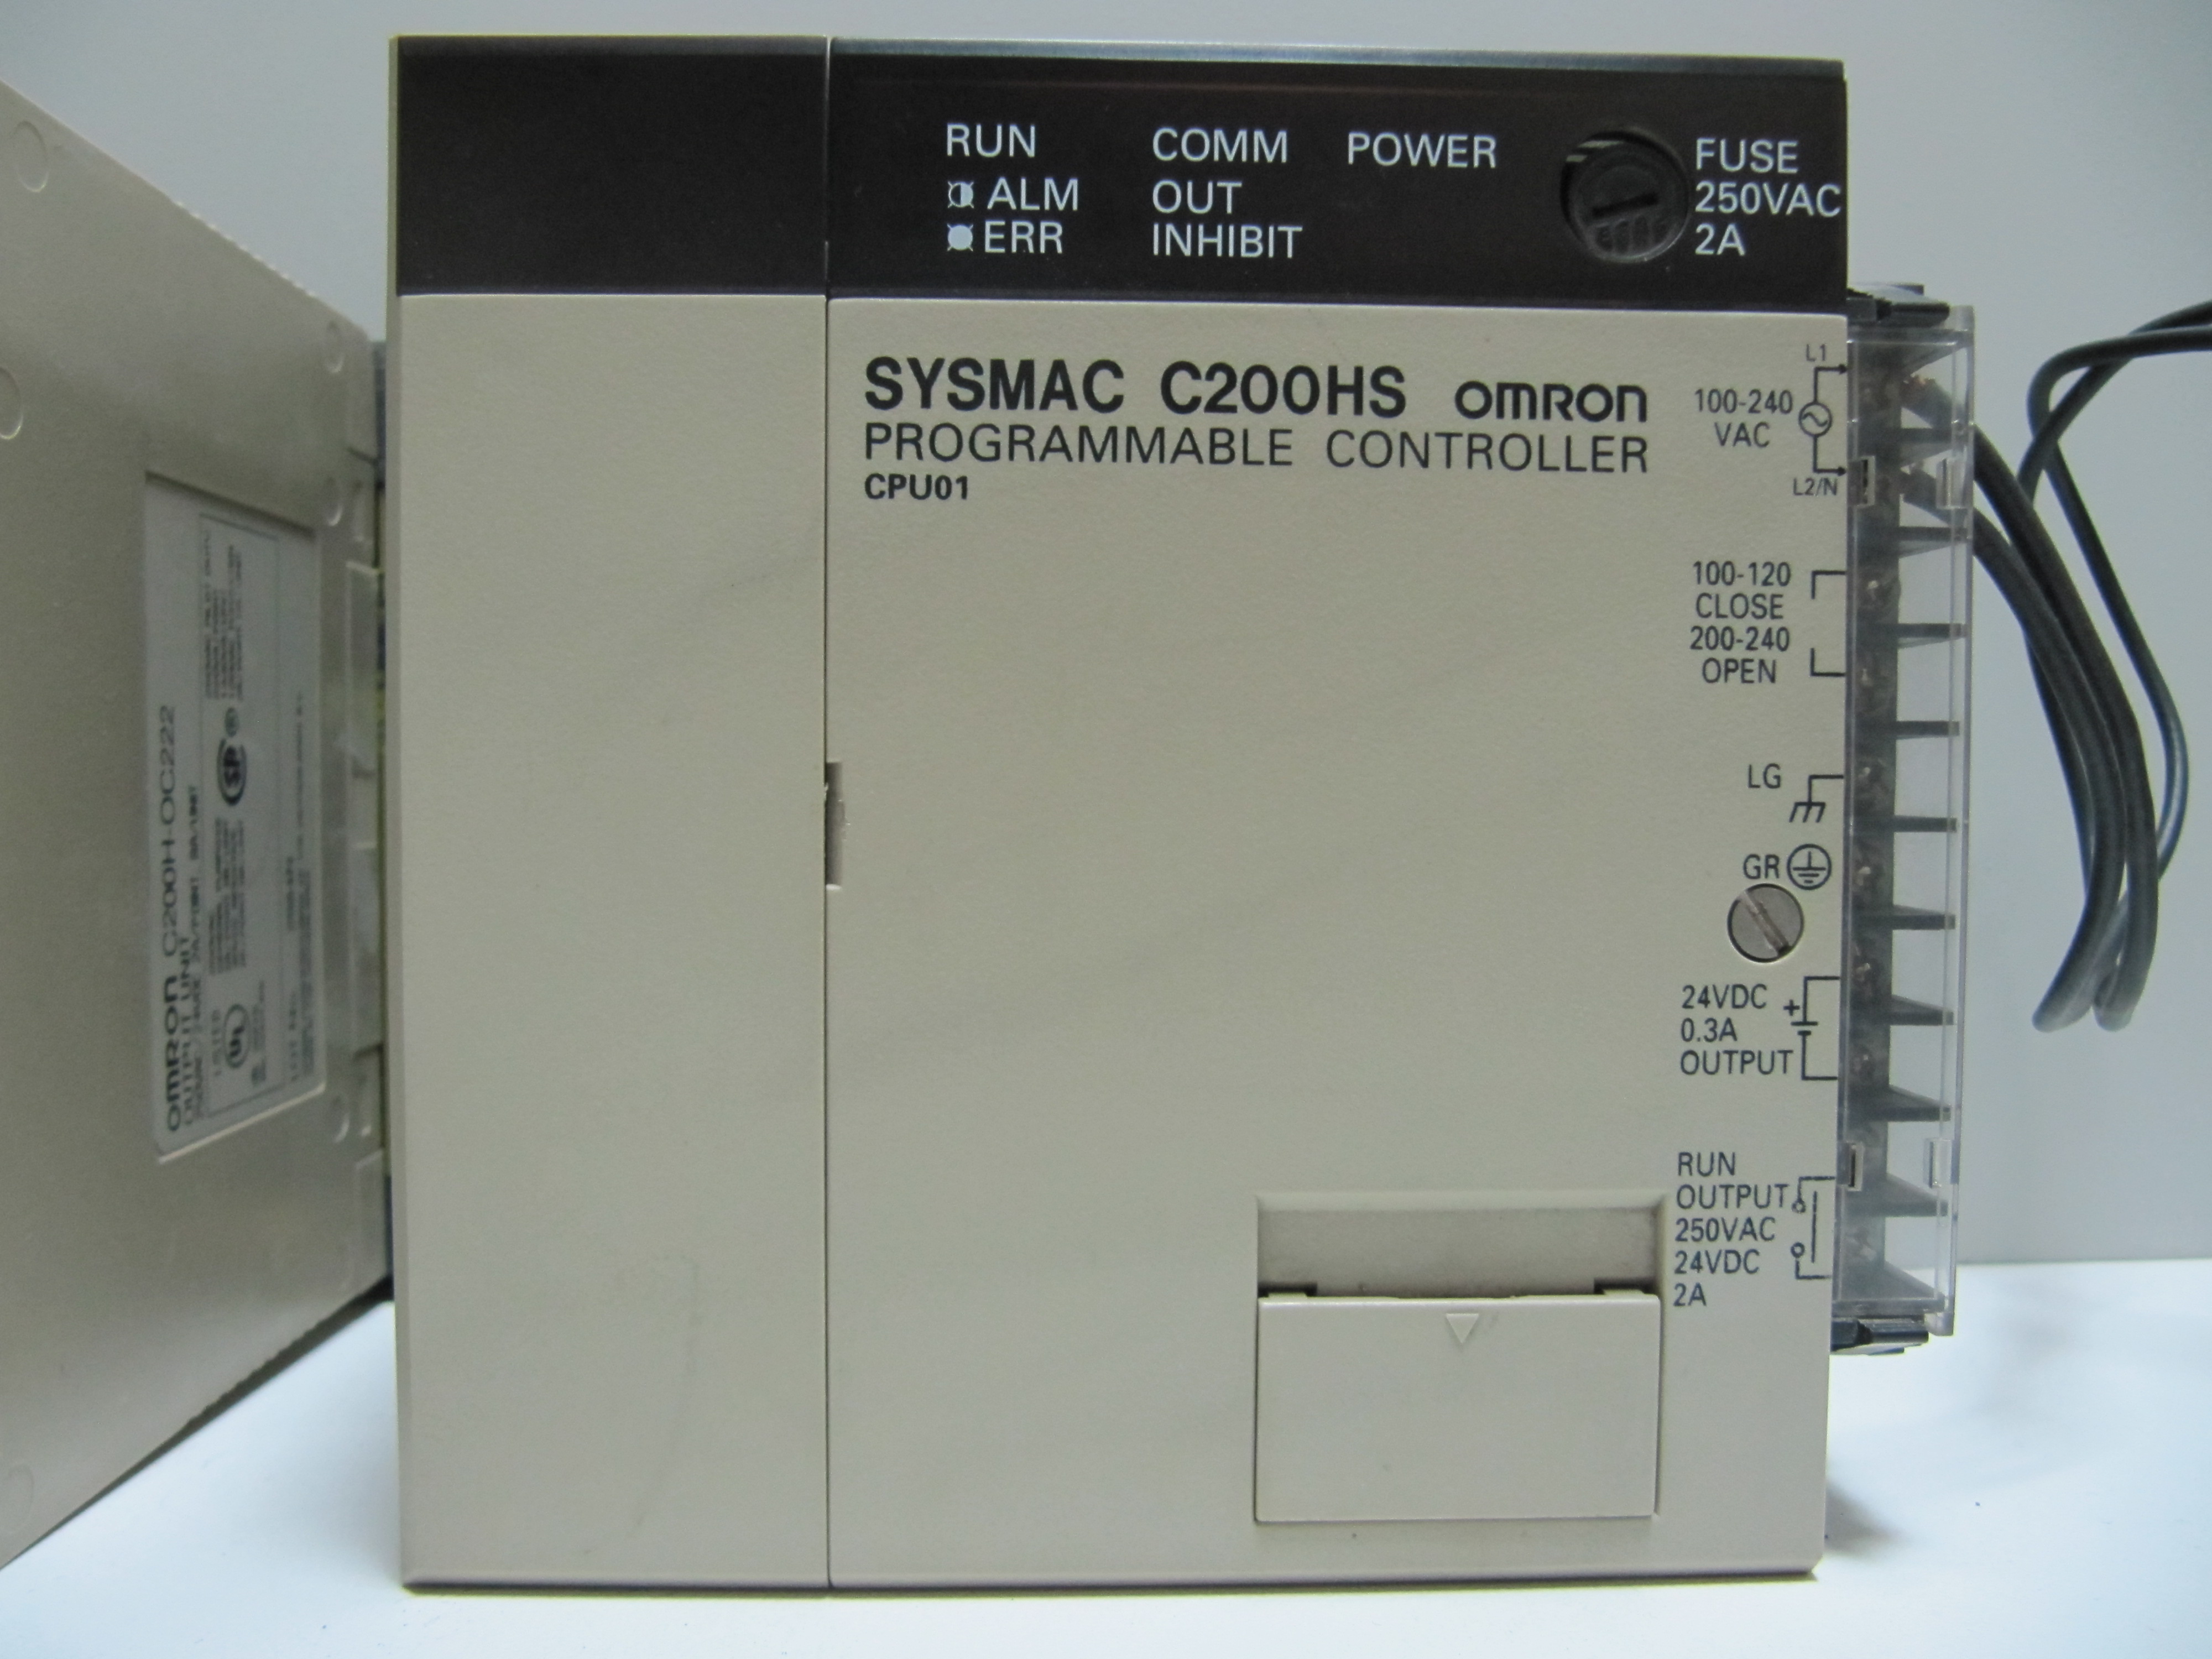 CPU01 SYSMAC C200HS OMRON PROGRAMMABLE CONTROLLER